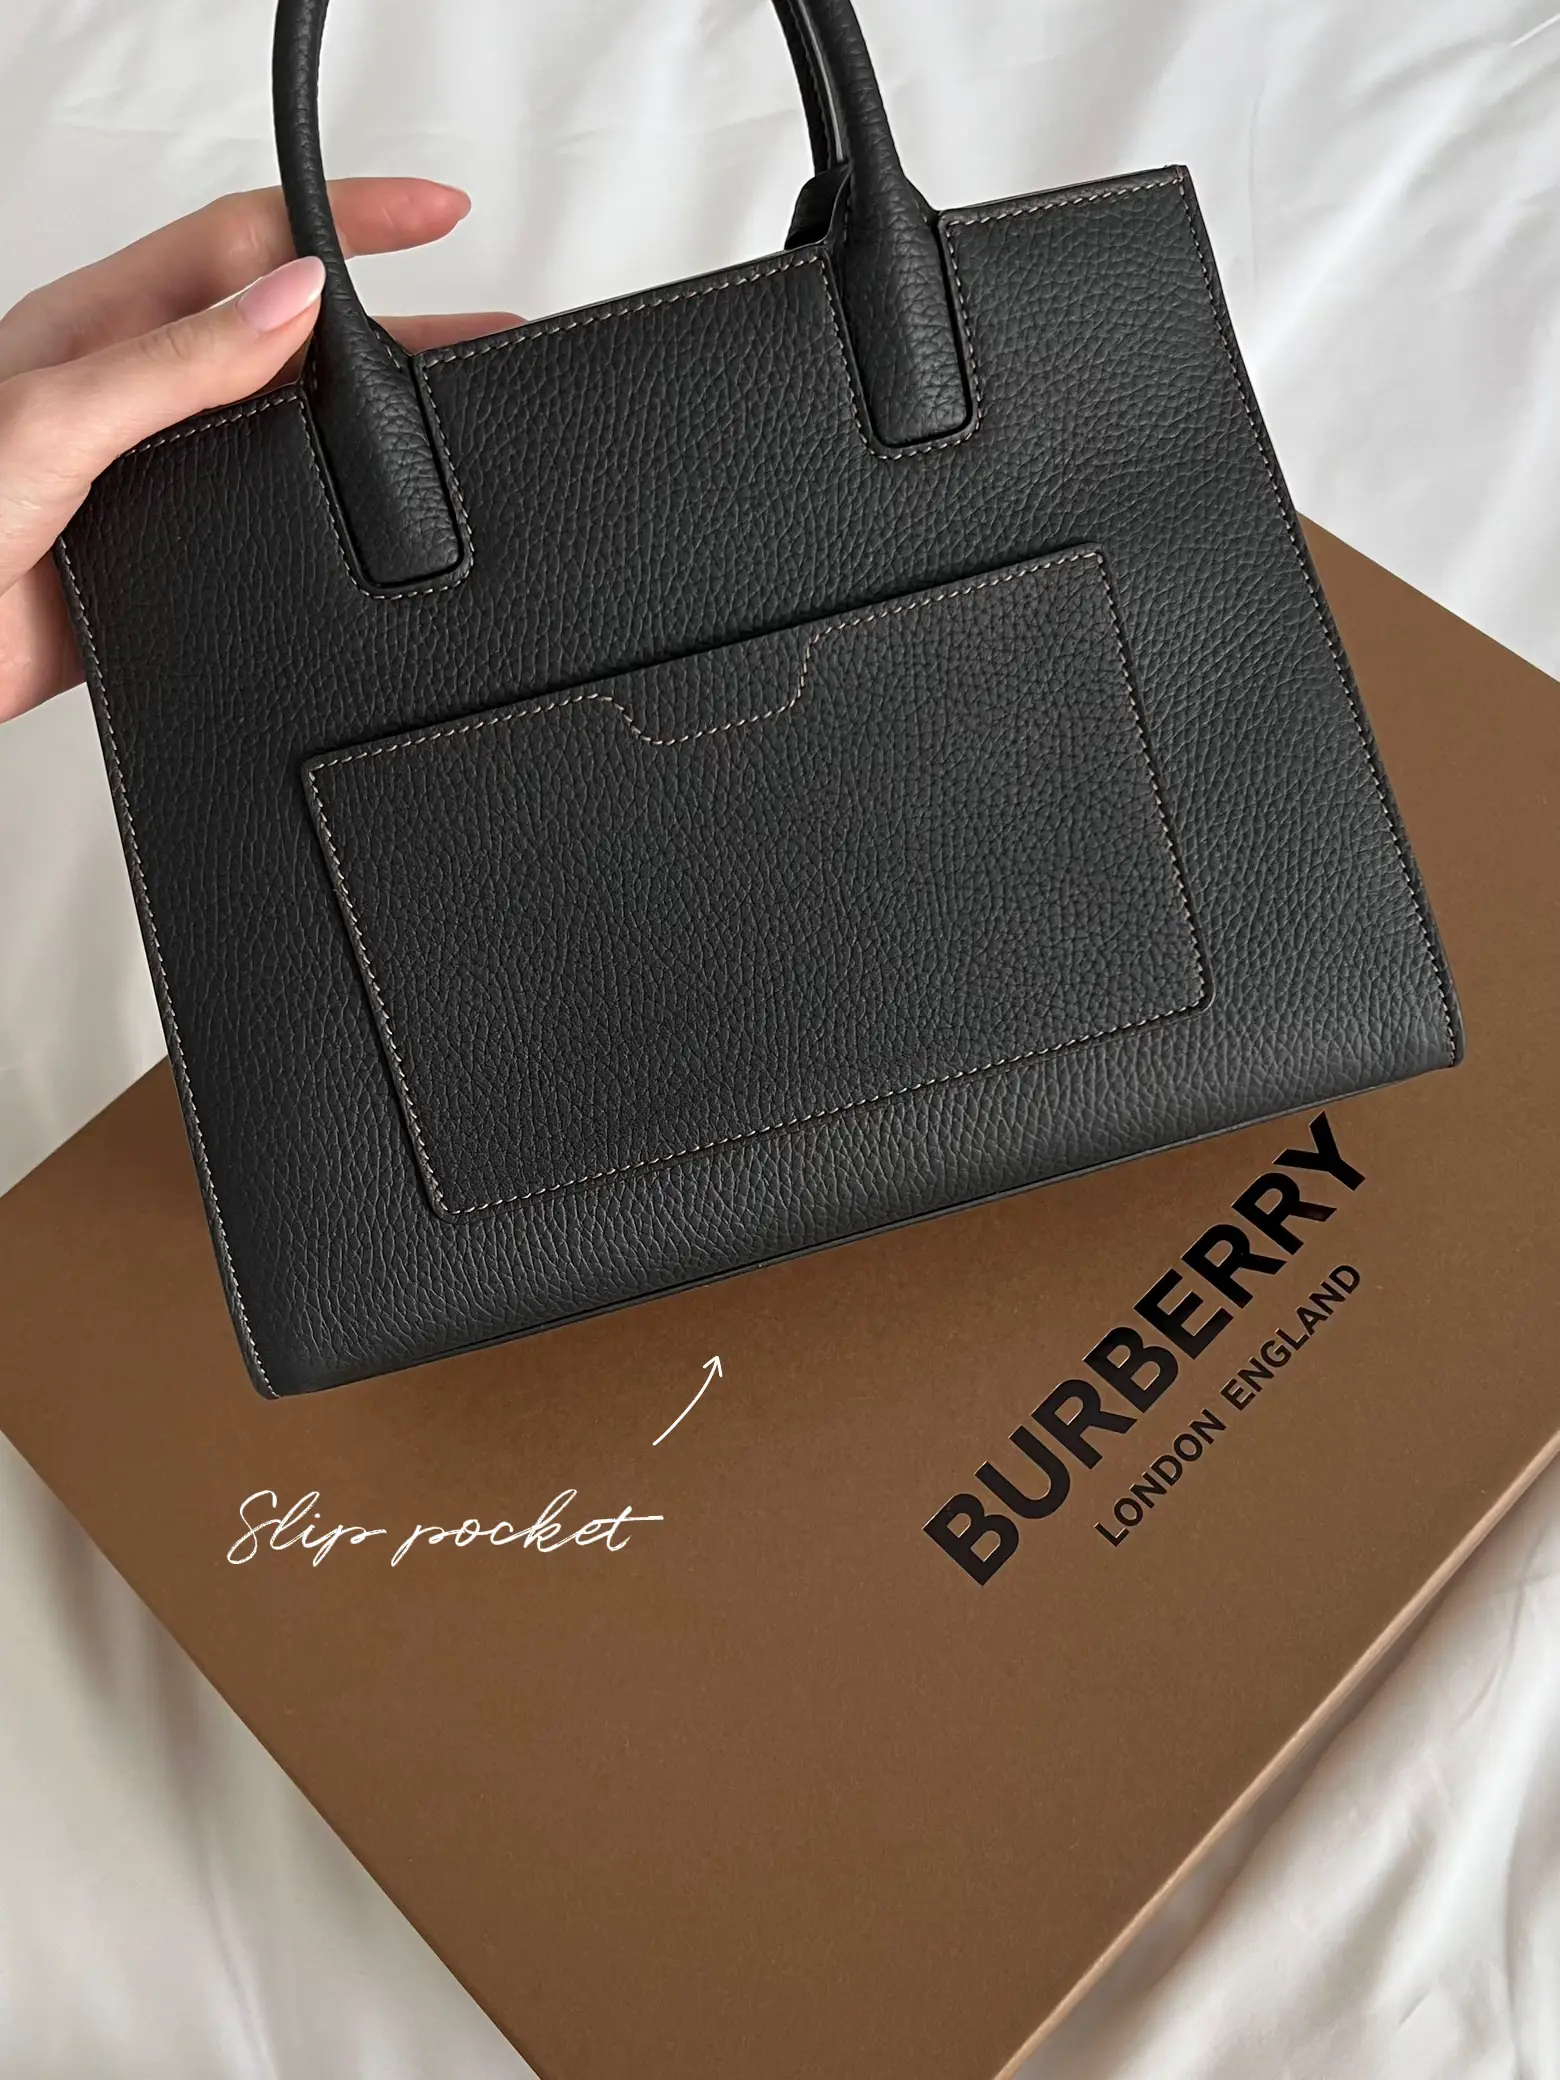 Burberry Frances Tote - Bag Review - Glam & Glitter